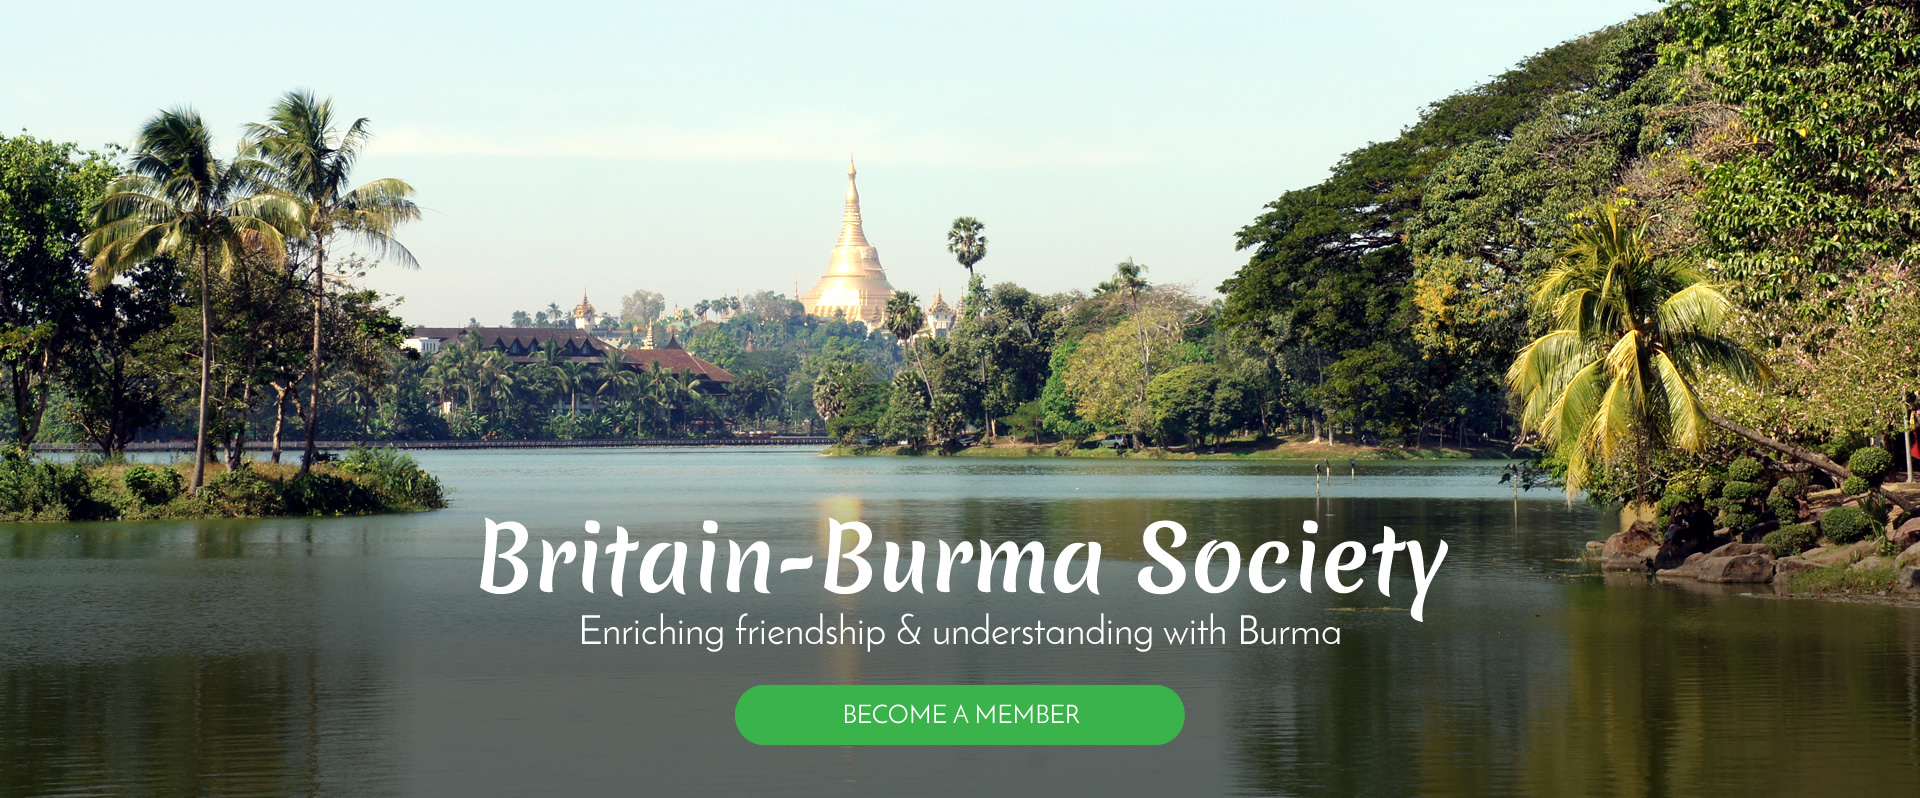 Welcome to The Britain Burma Society - Enriching friendship & understanding with Burma